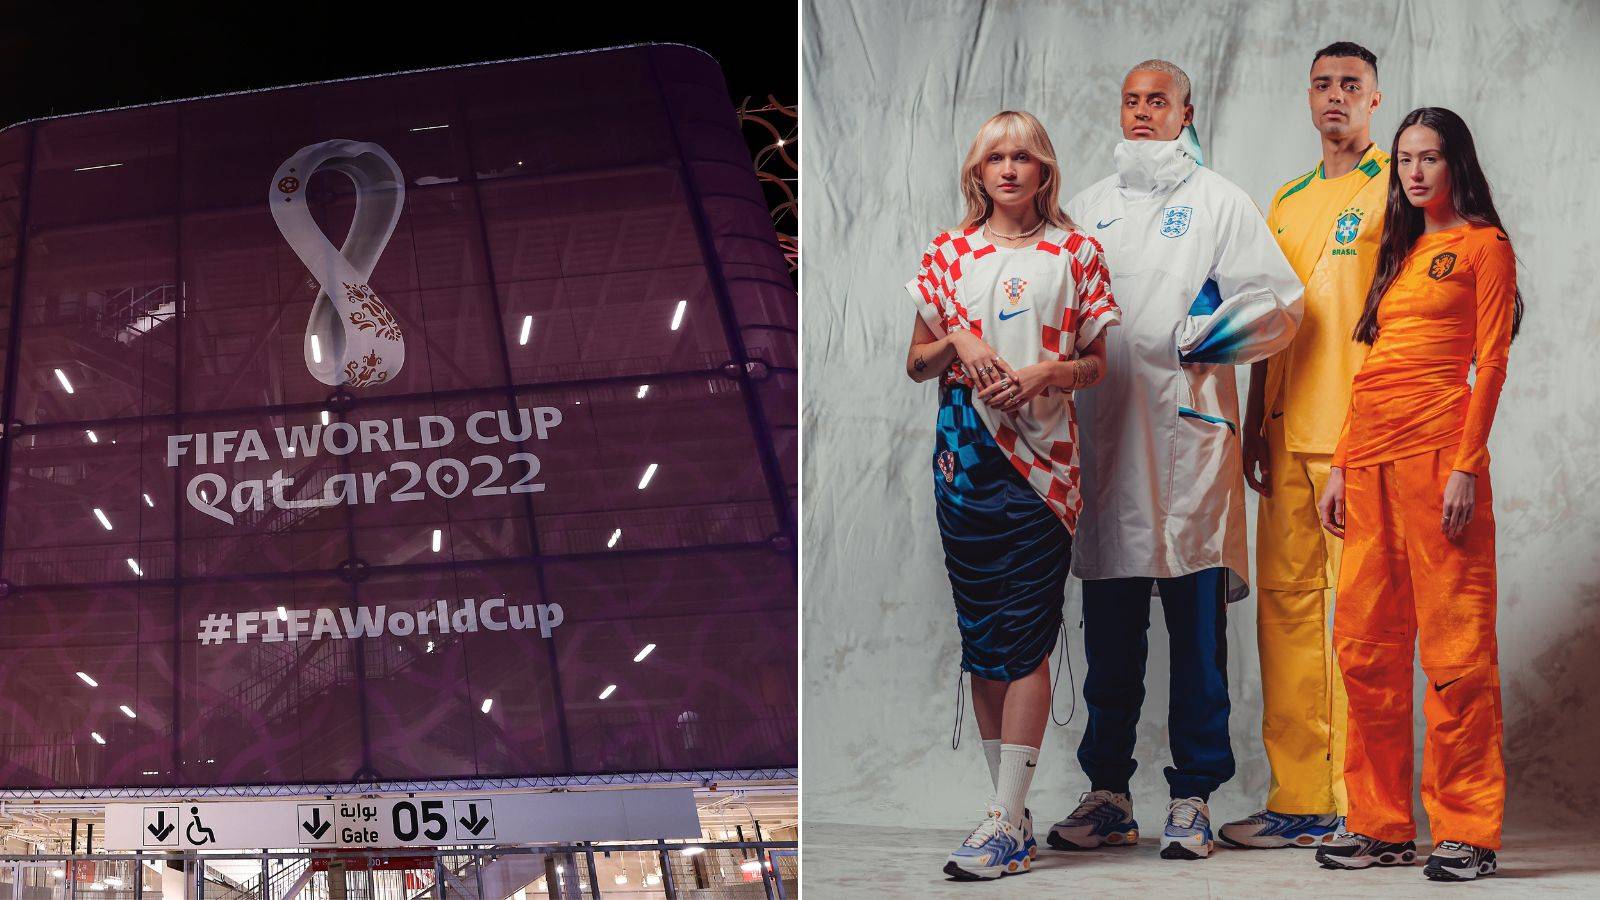 Split image of the Qatar World Cup and an Art of Football photoshoot